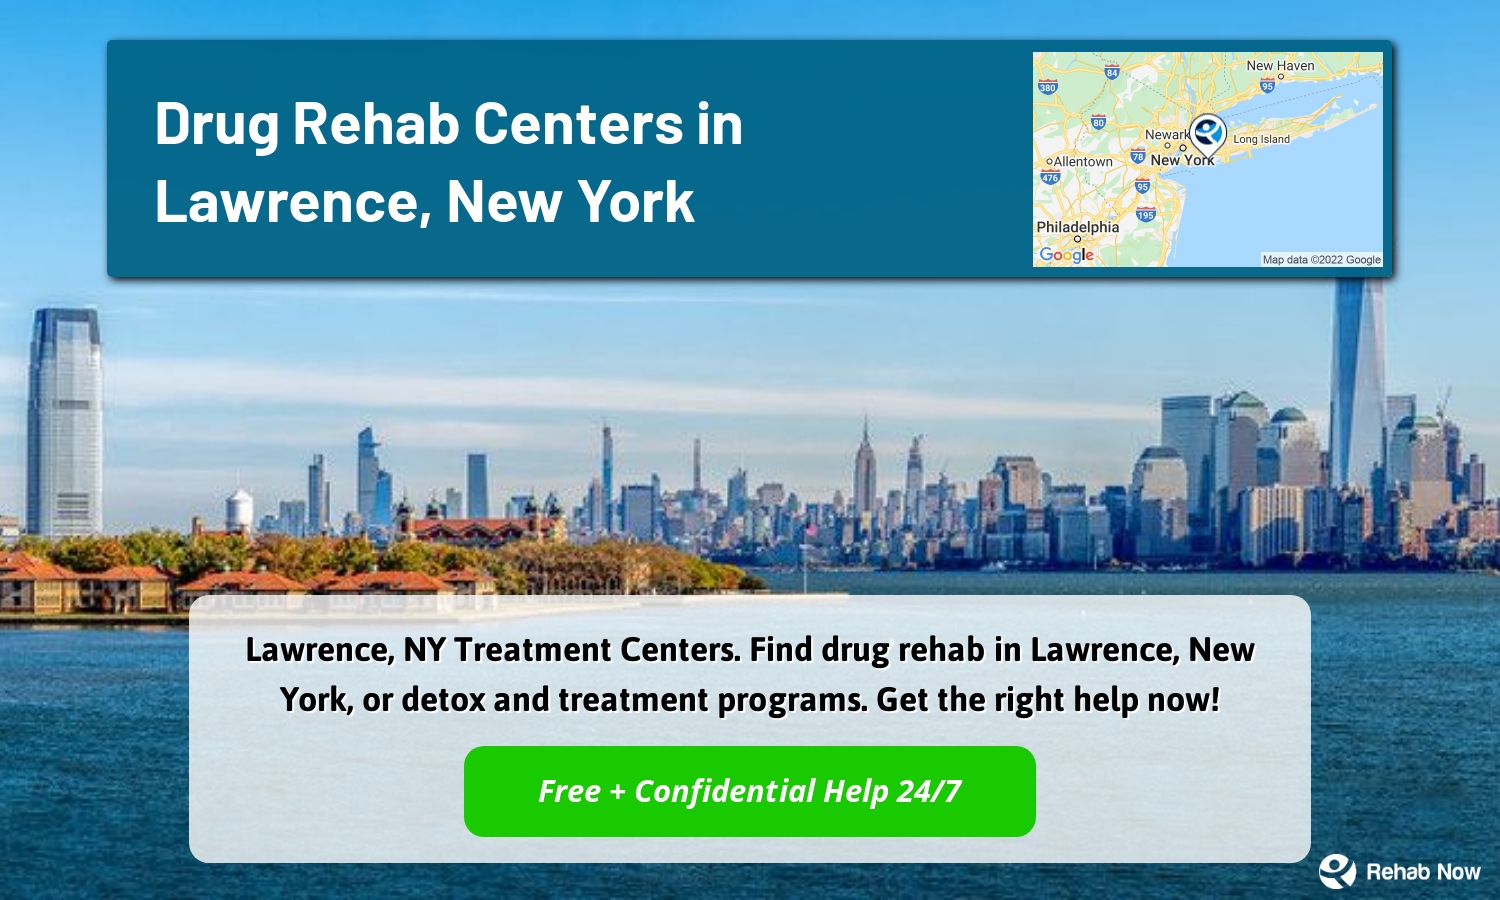 Lawrence, NY Treatment Centers. Find drug rehab in Lawrence, New York, or detox and treatment programs. Get the right help now!